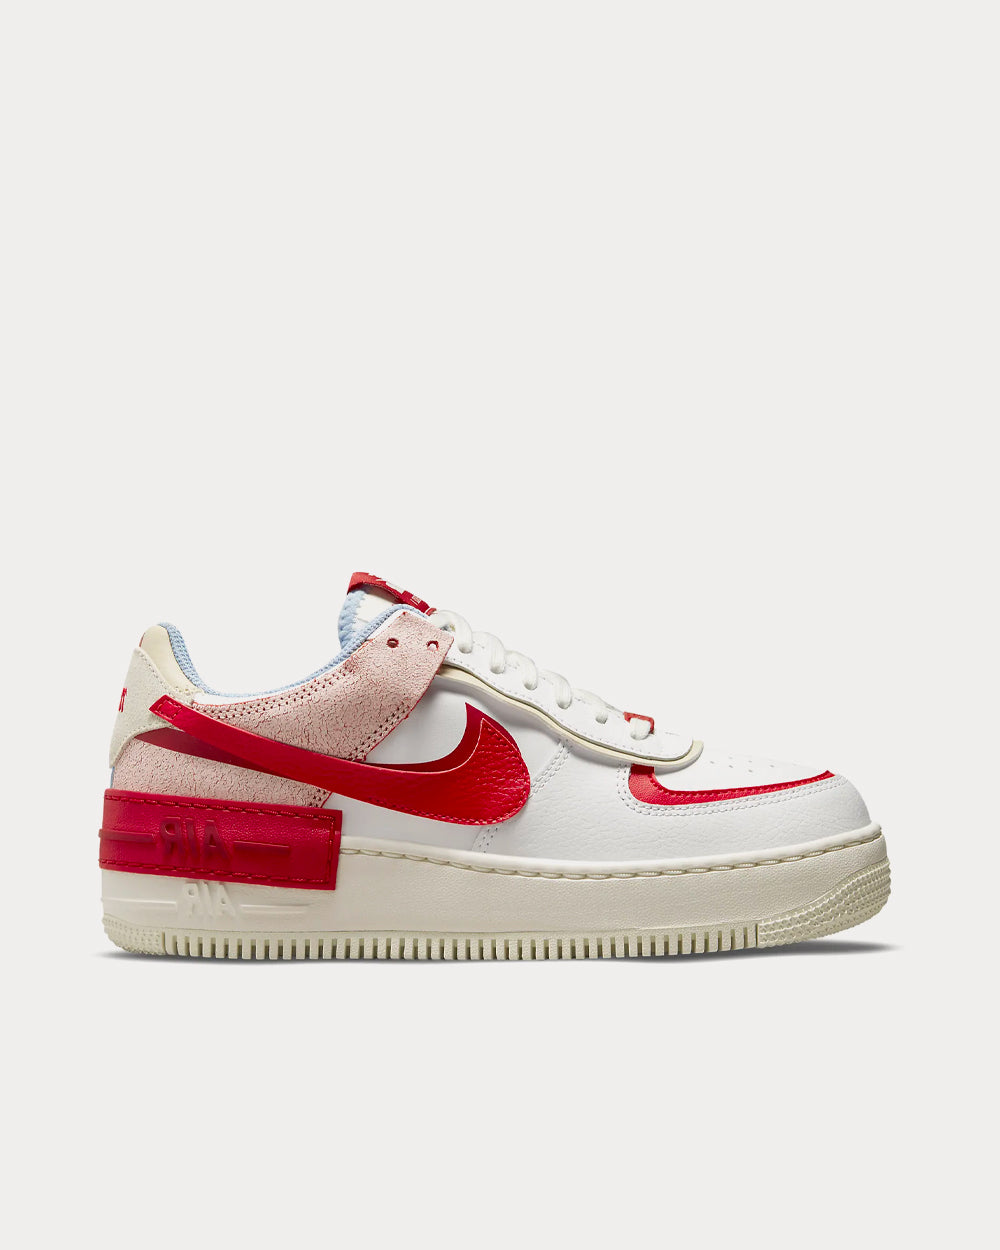 Nike Air Force 1 Summit White/Solar Red